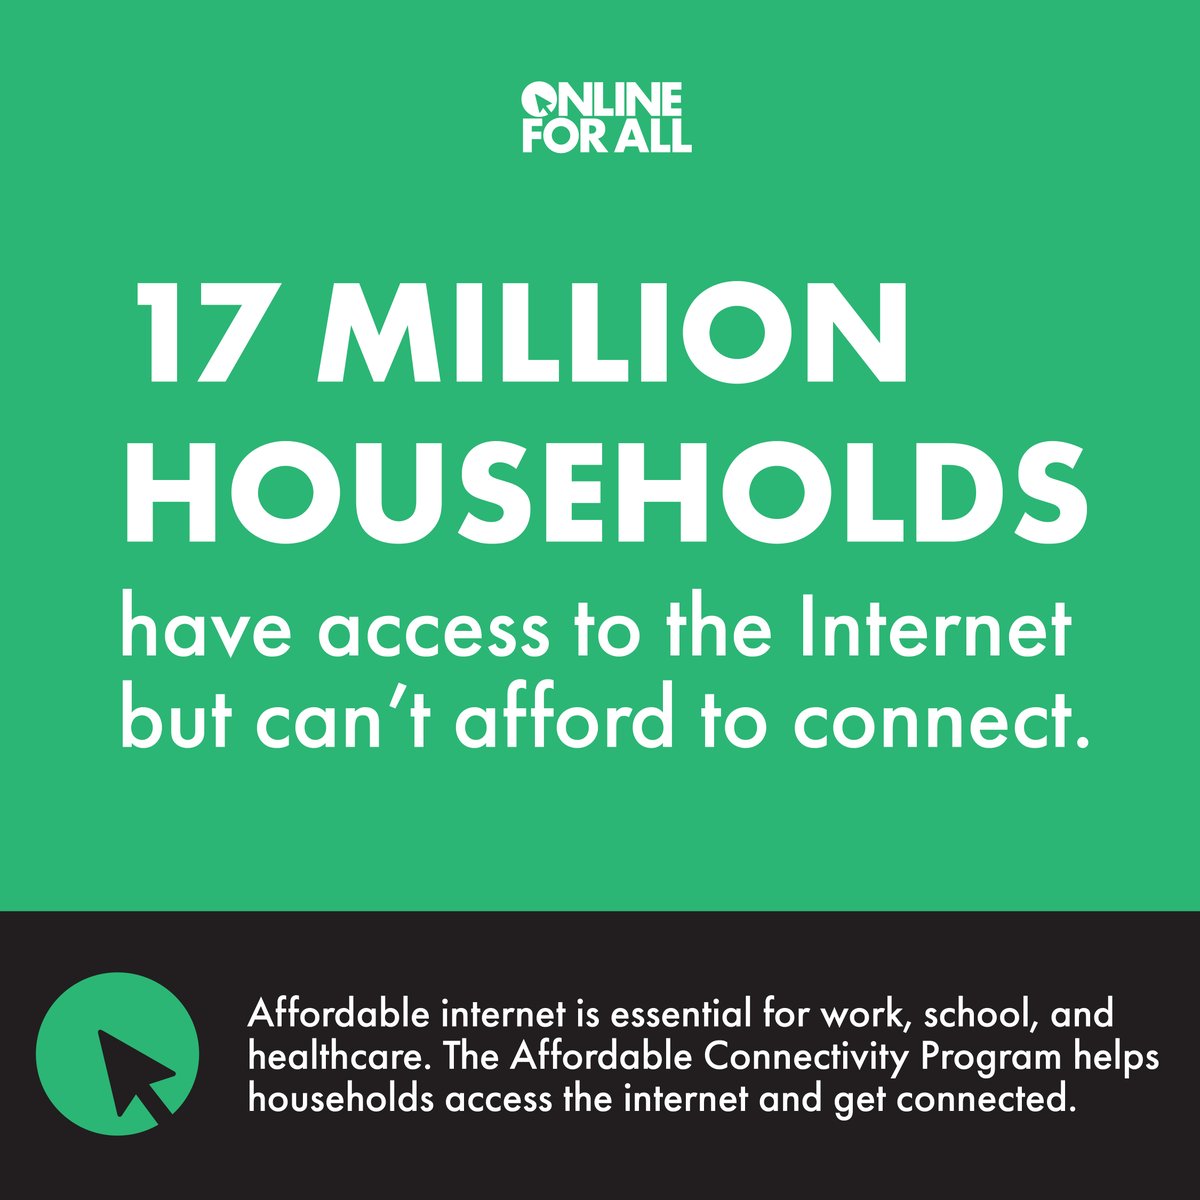 #DYK? Through the #OnlineForAll campaign, ED & @CivicNation help to bridge the digital divide by helping millions of students & their families connect to the internet for FREE. 

Learn how you can sign up at onlineforall.org.